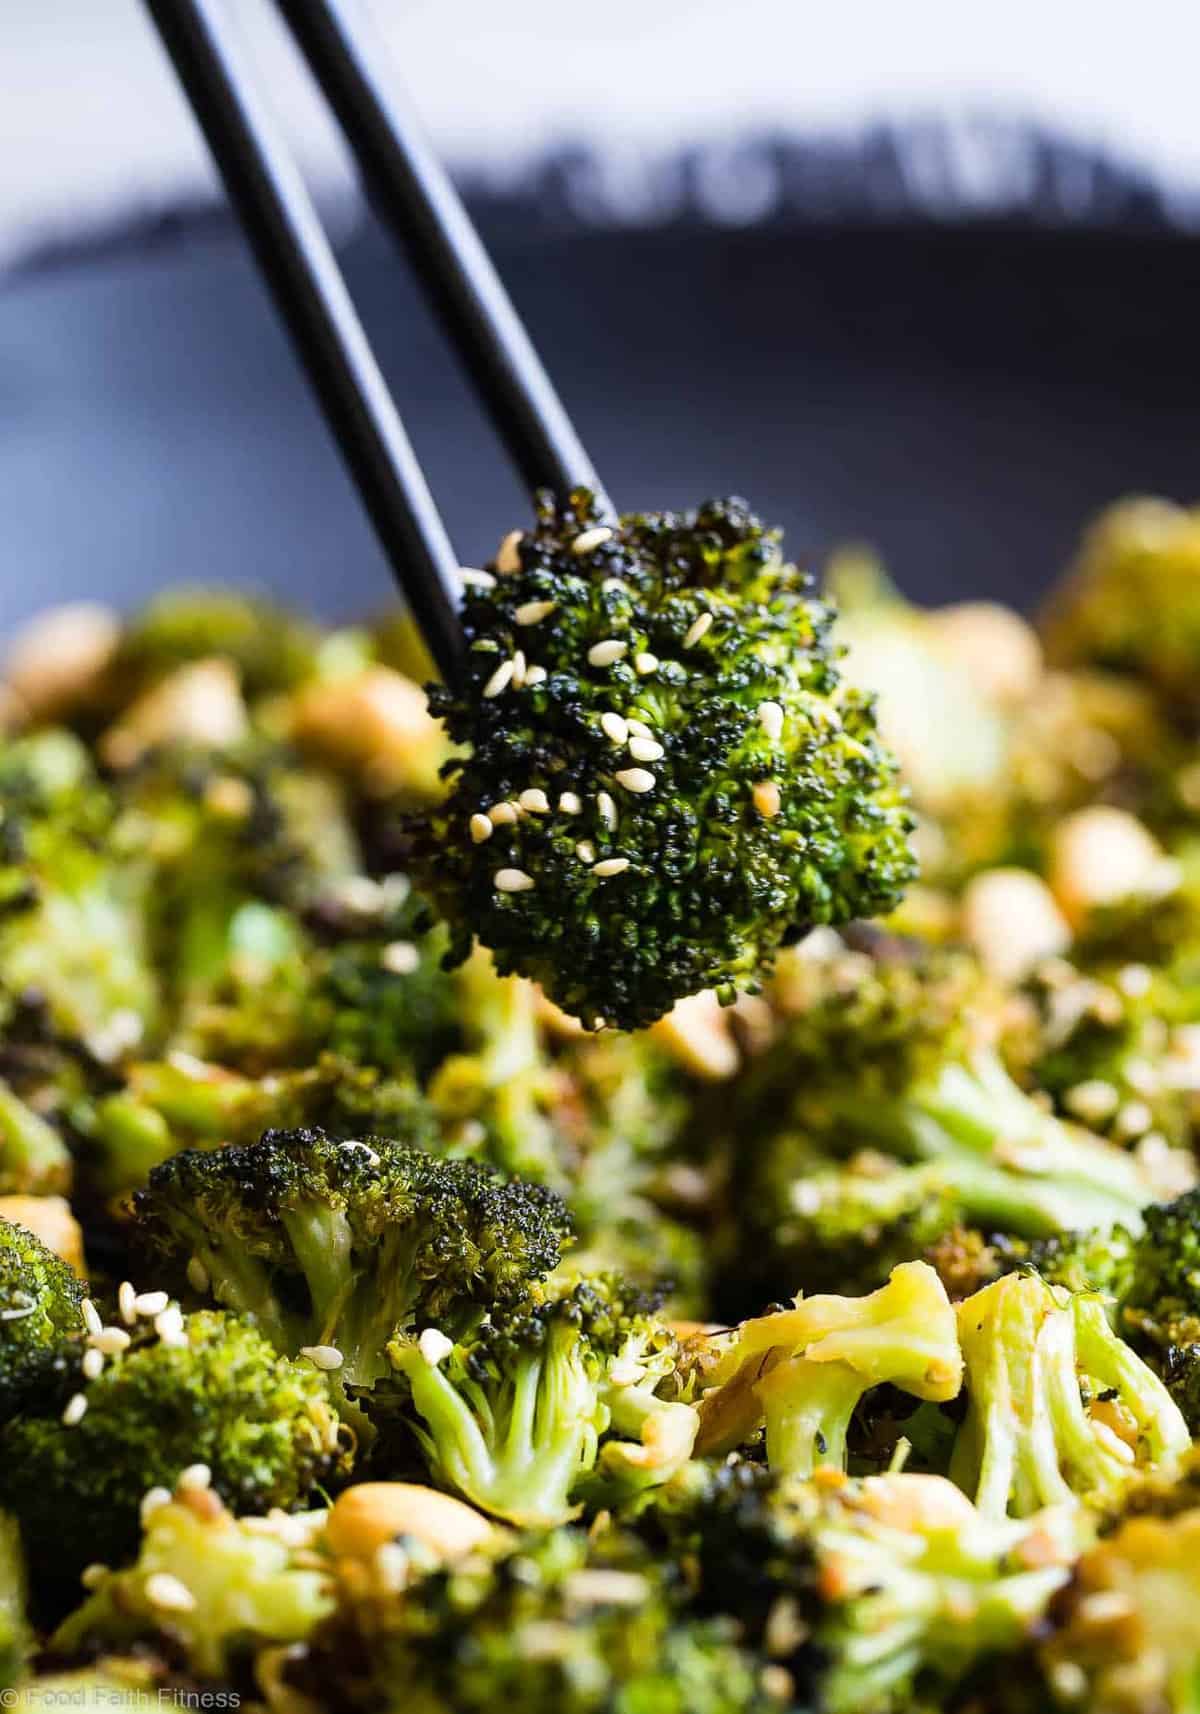 Air Fryer Roasted Asian Broccoli - This healthy, gluten free and low carb Asian broccoli has a spicy, Asian dressing to give a kick to your next meal! Sure to make your family LOVE vegetables and an oven roasted option is included! | #Foodfaithfitness | #Vegan #Healthy #AirFyer #Glutenfree #Lowcarb